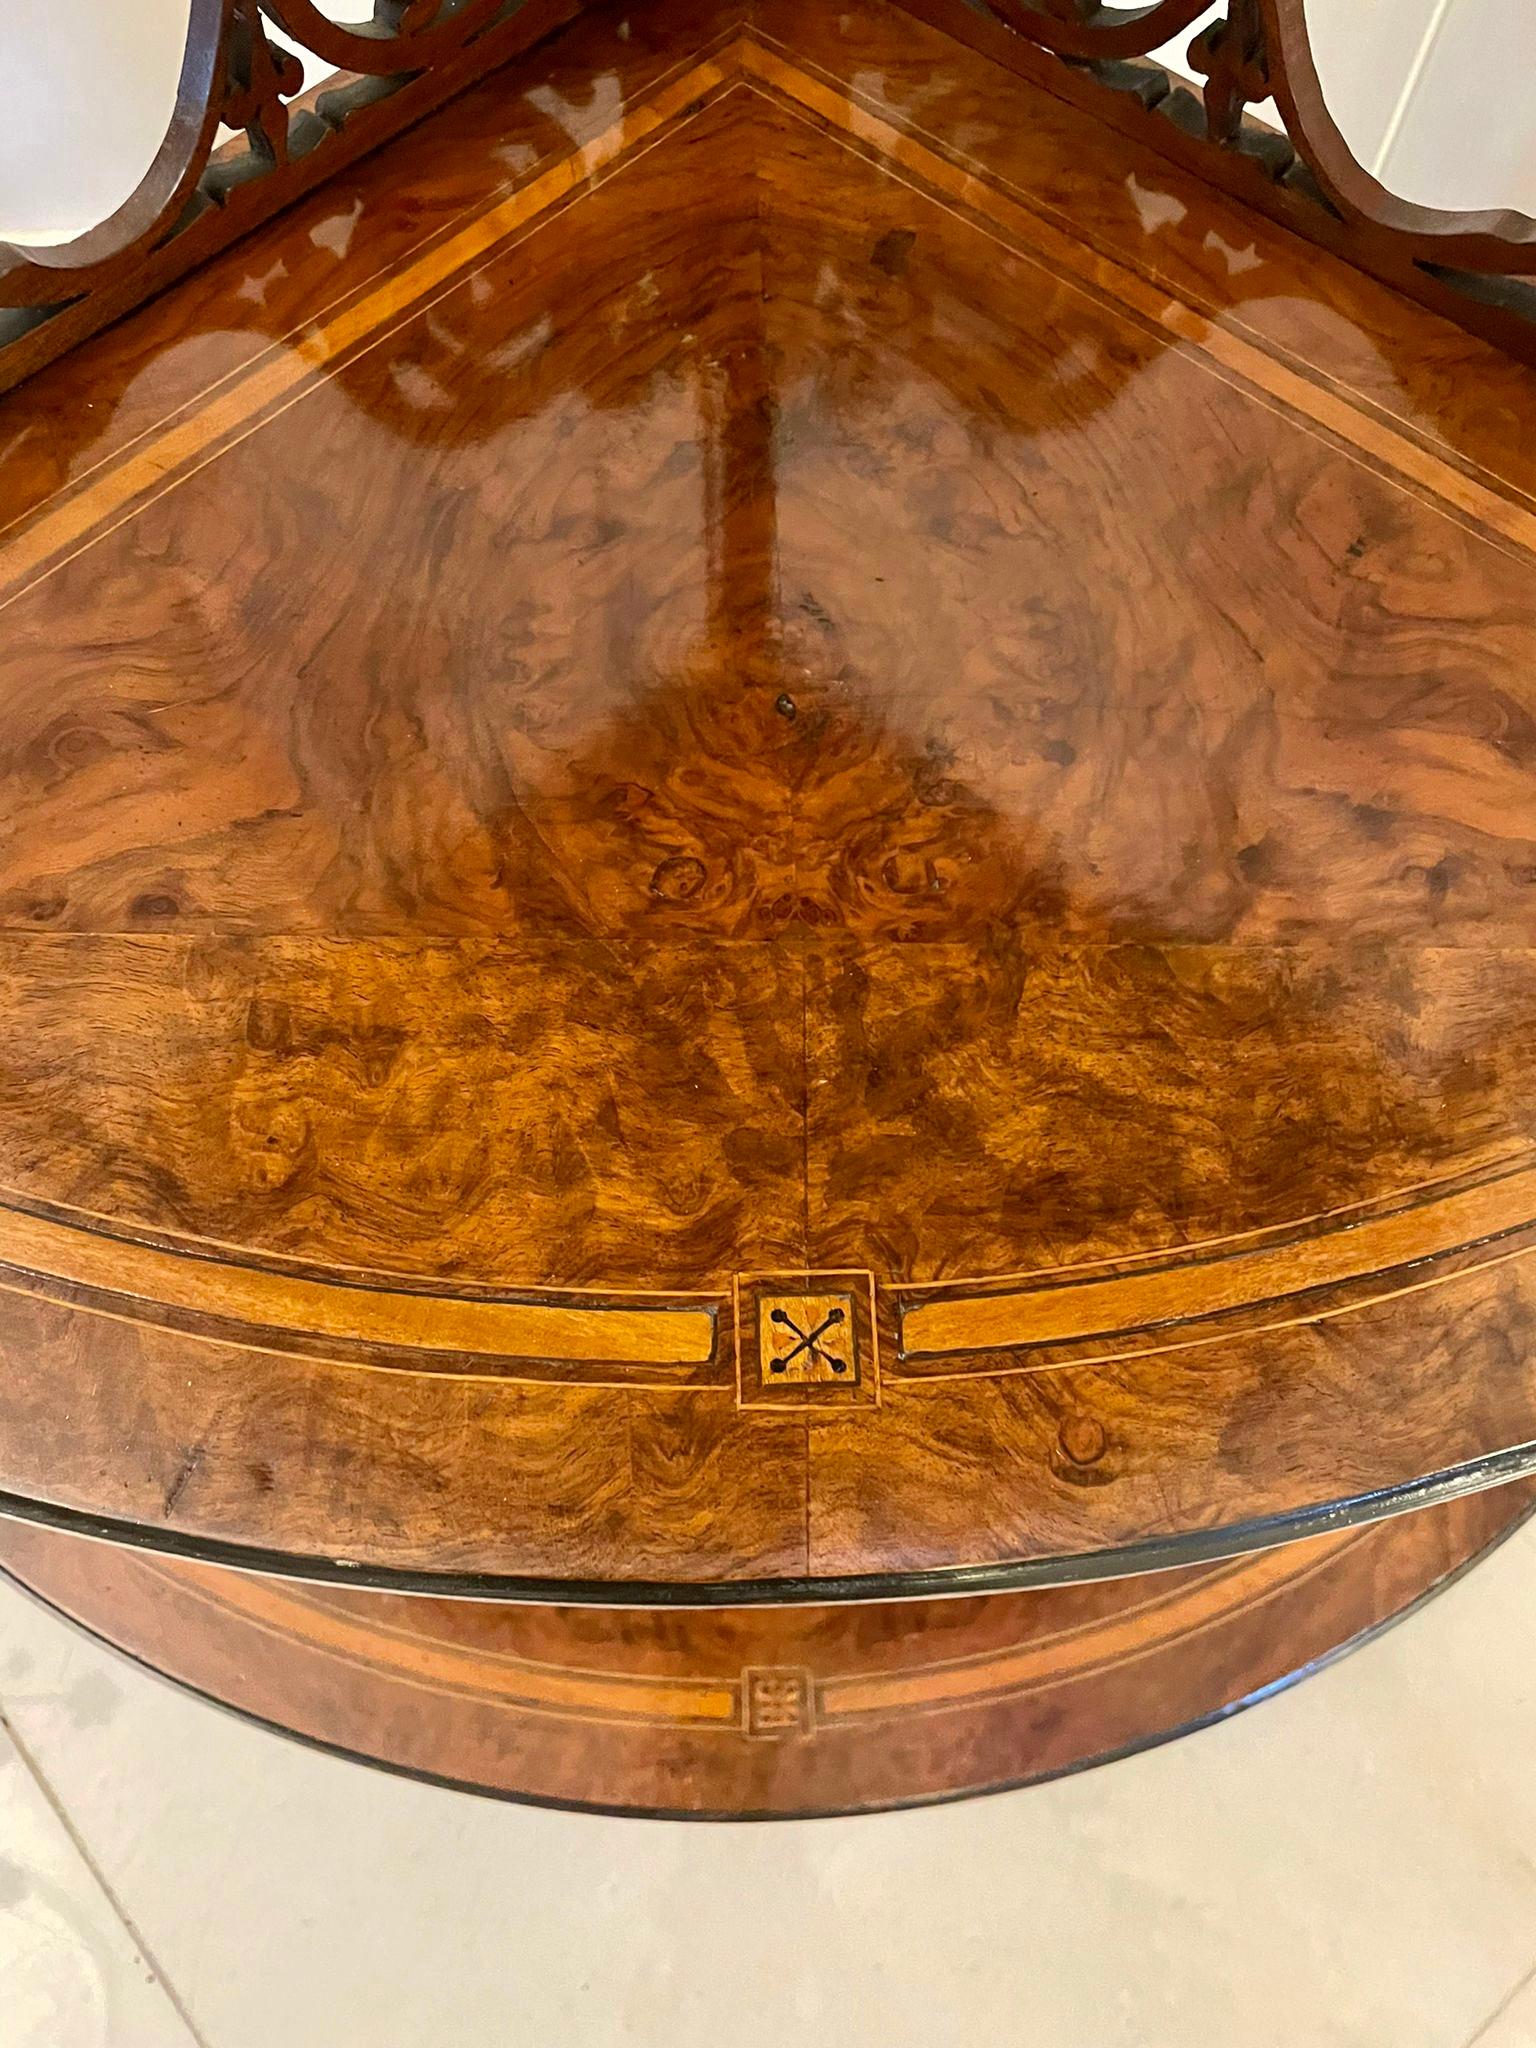 Quality antique Victorian inlaid burr walnut corner whatnot having four quality burr walnut inlaid bow fronted tiers with finely pierced scroll brackets supported by quality turned solid walnut columns. It is raised on turned feet with original